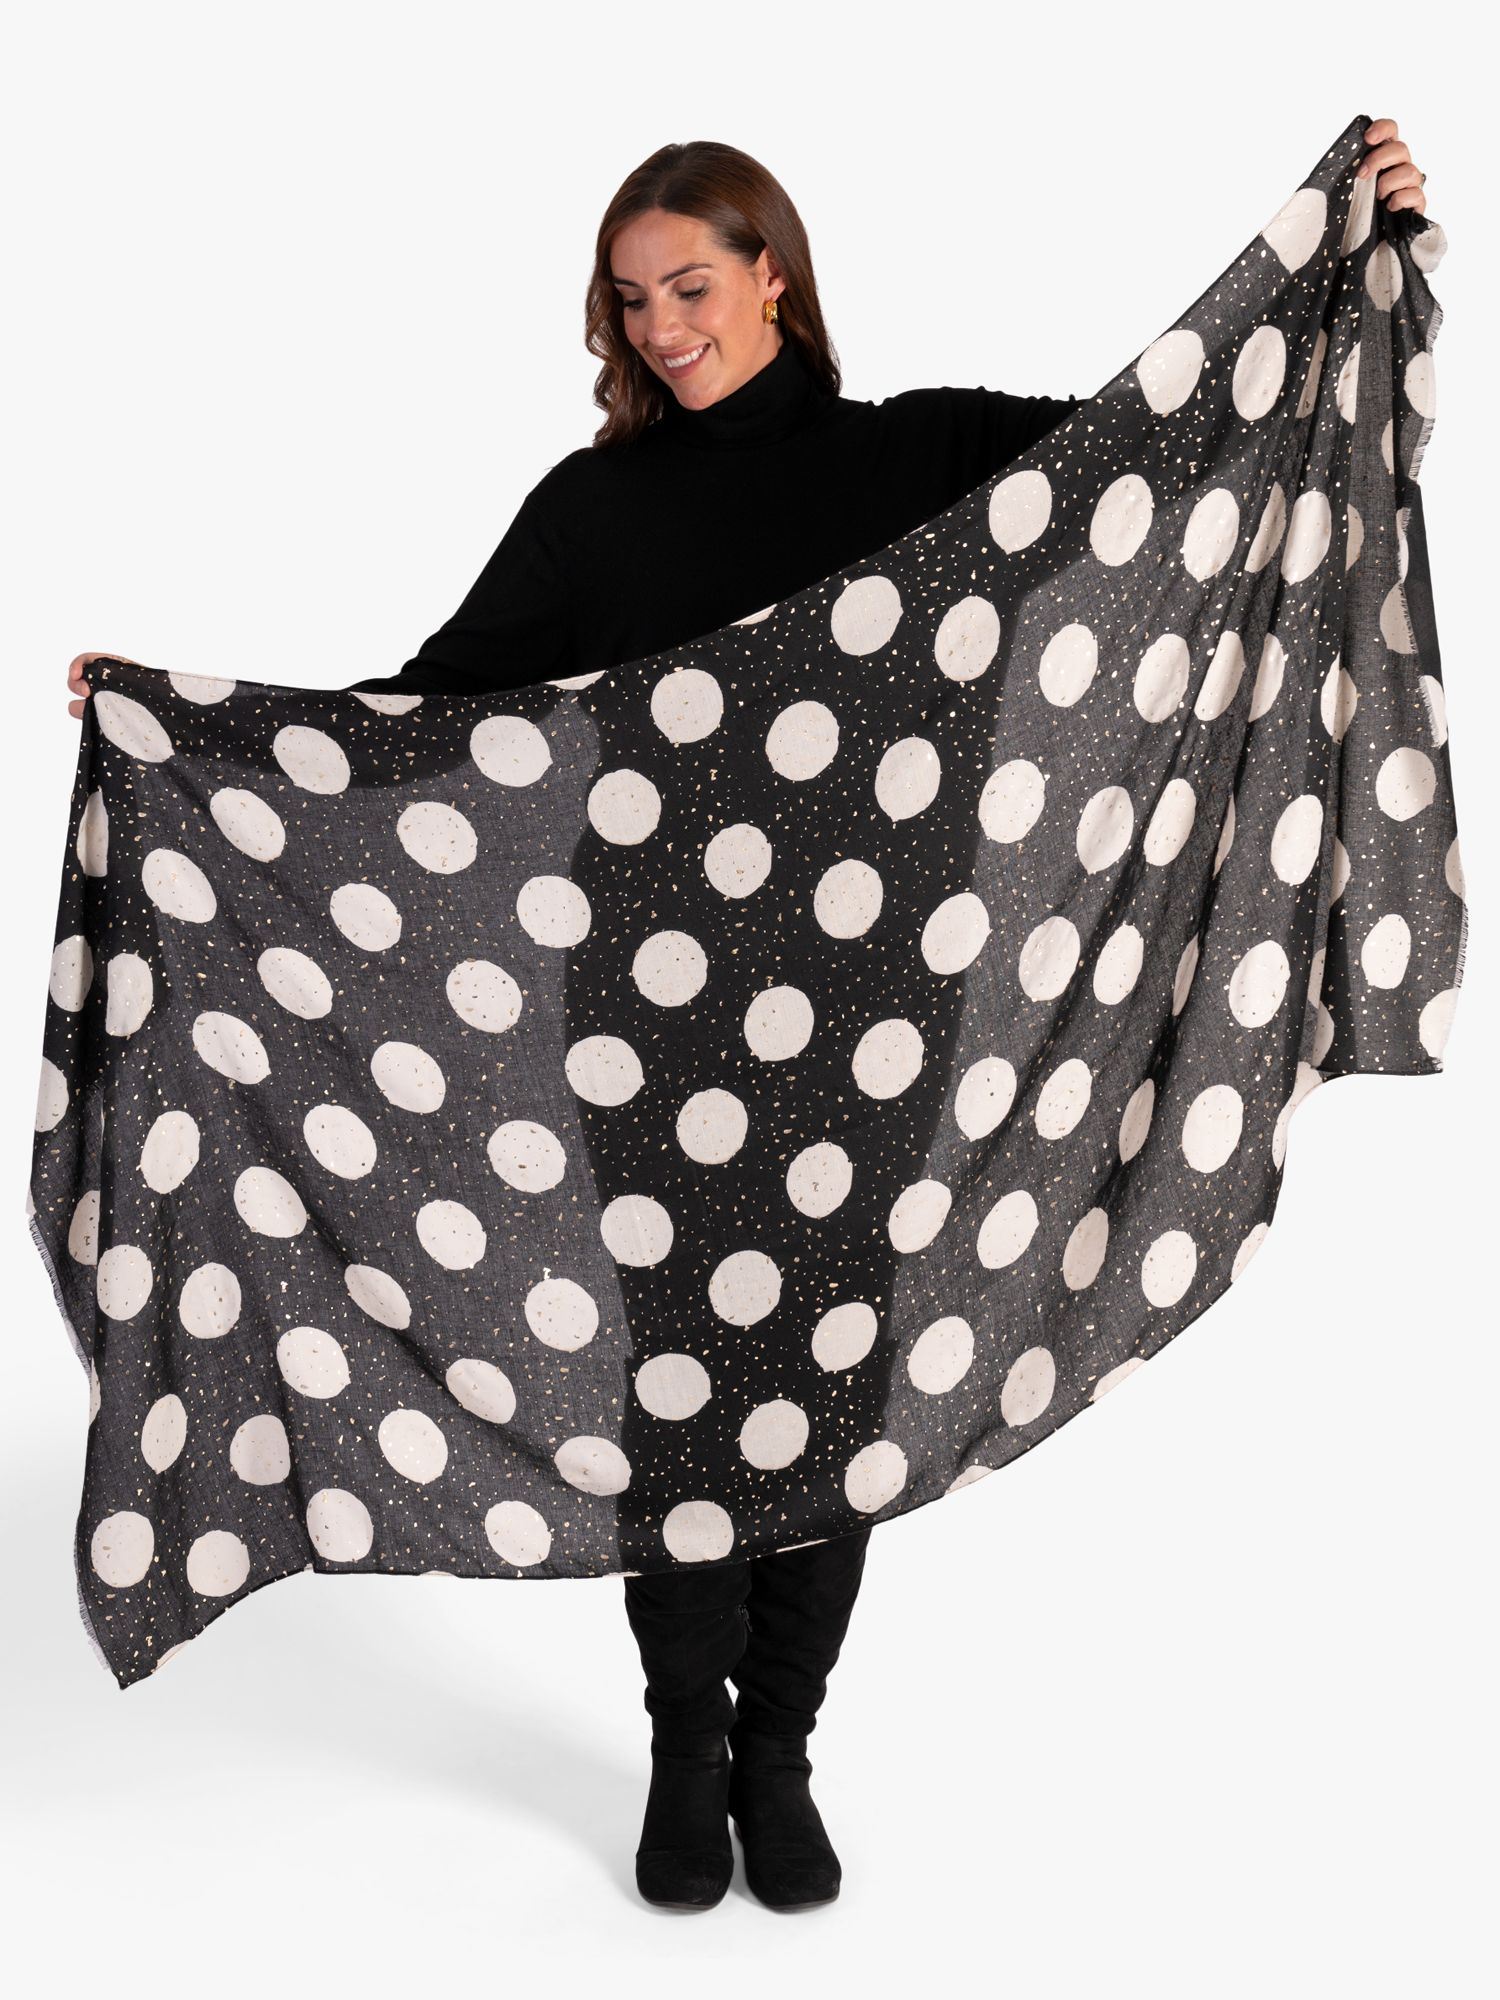 chesca Large Spot with Speckles Printed Scarf, Black/Gold, One Size